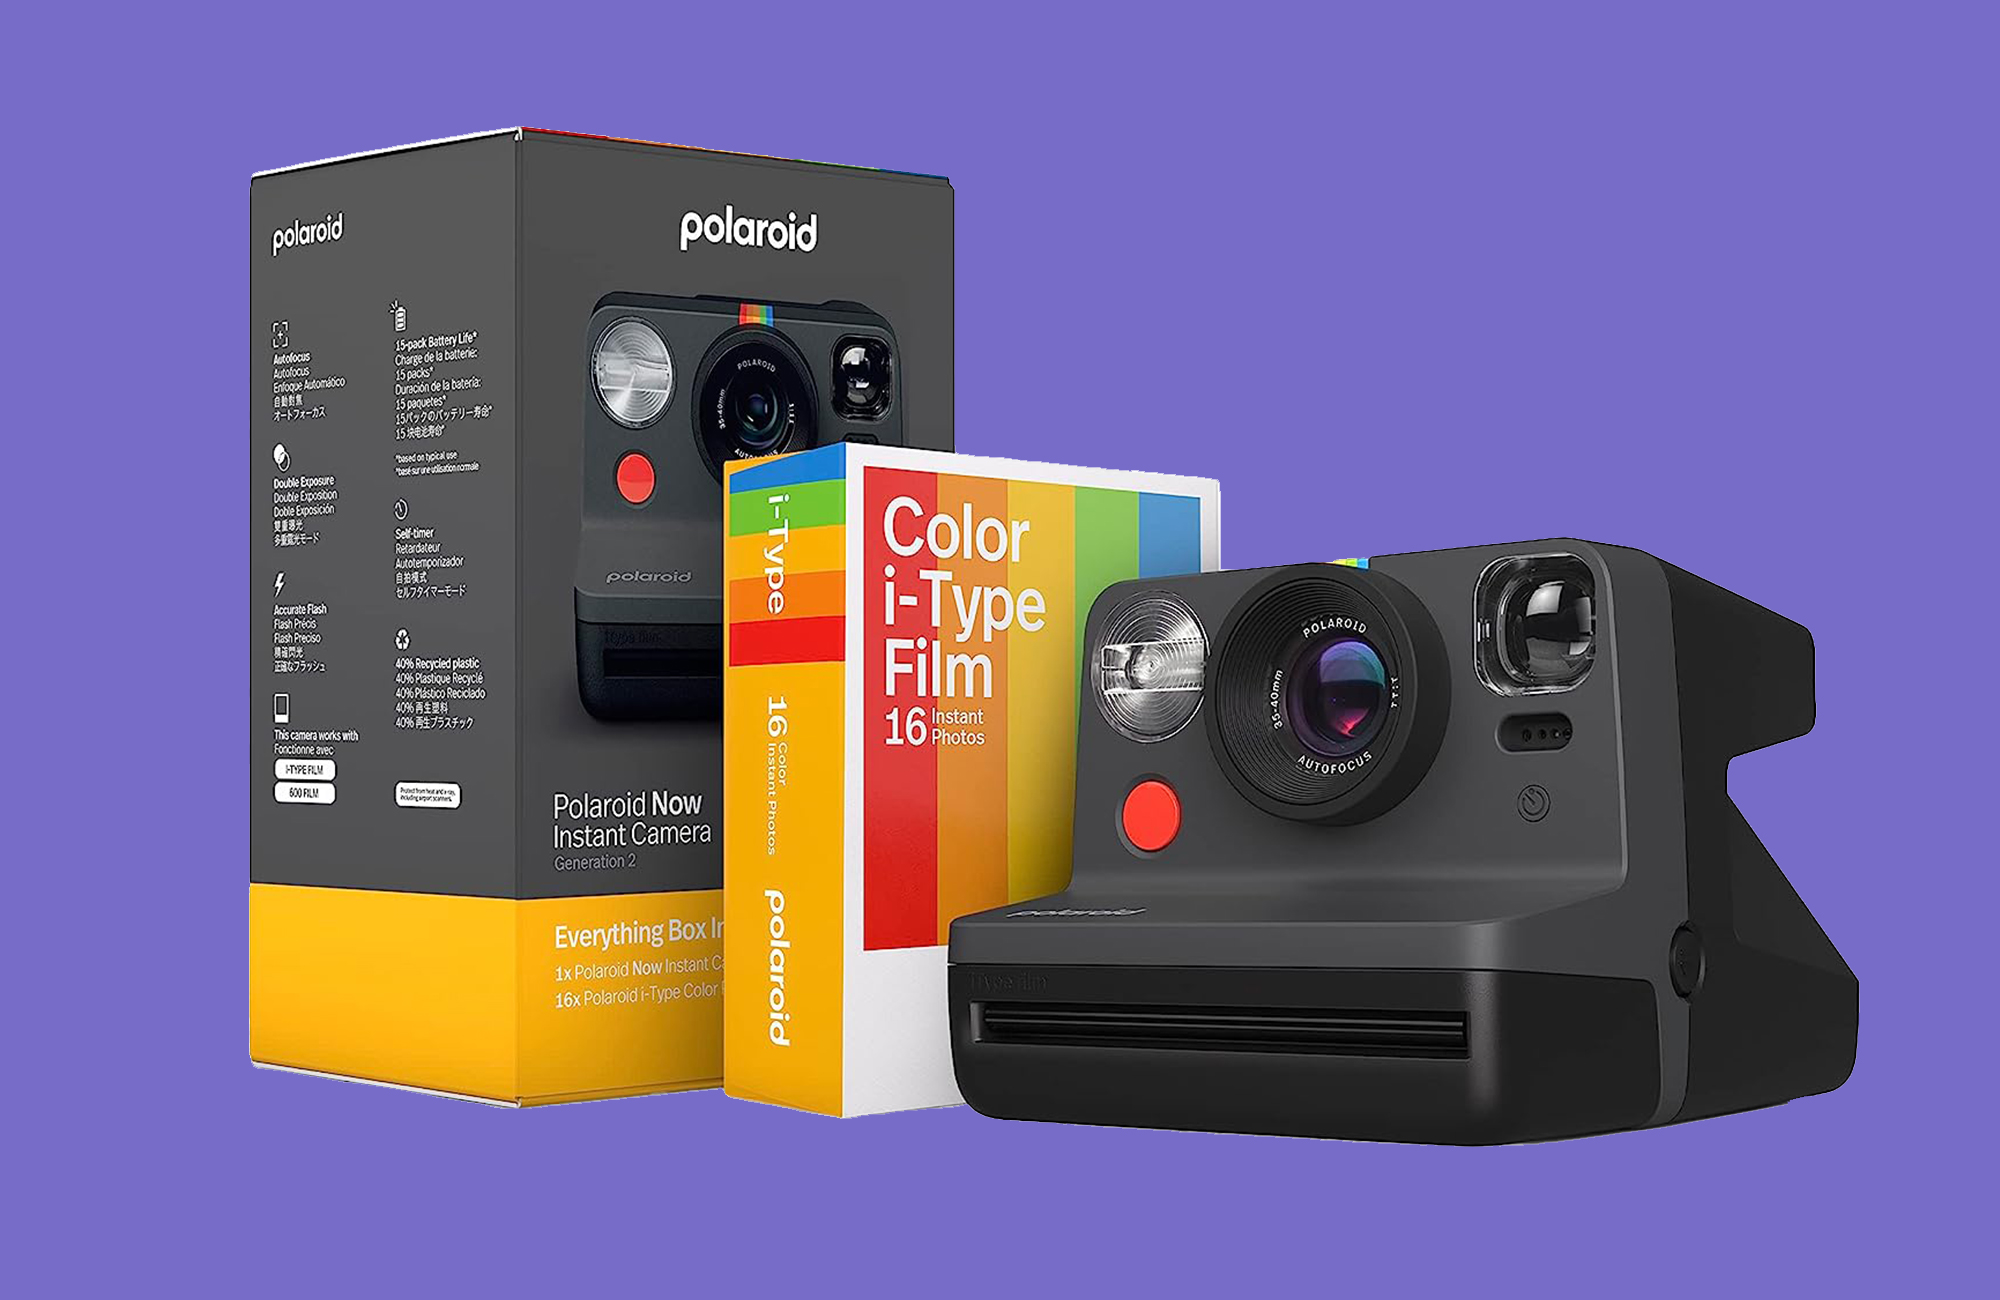 Snag a discounted Polaroid Now during this early Amazon Prime Day deal